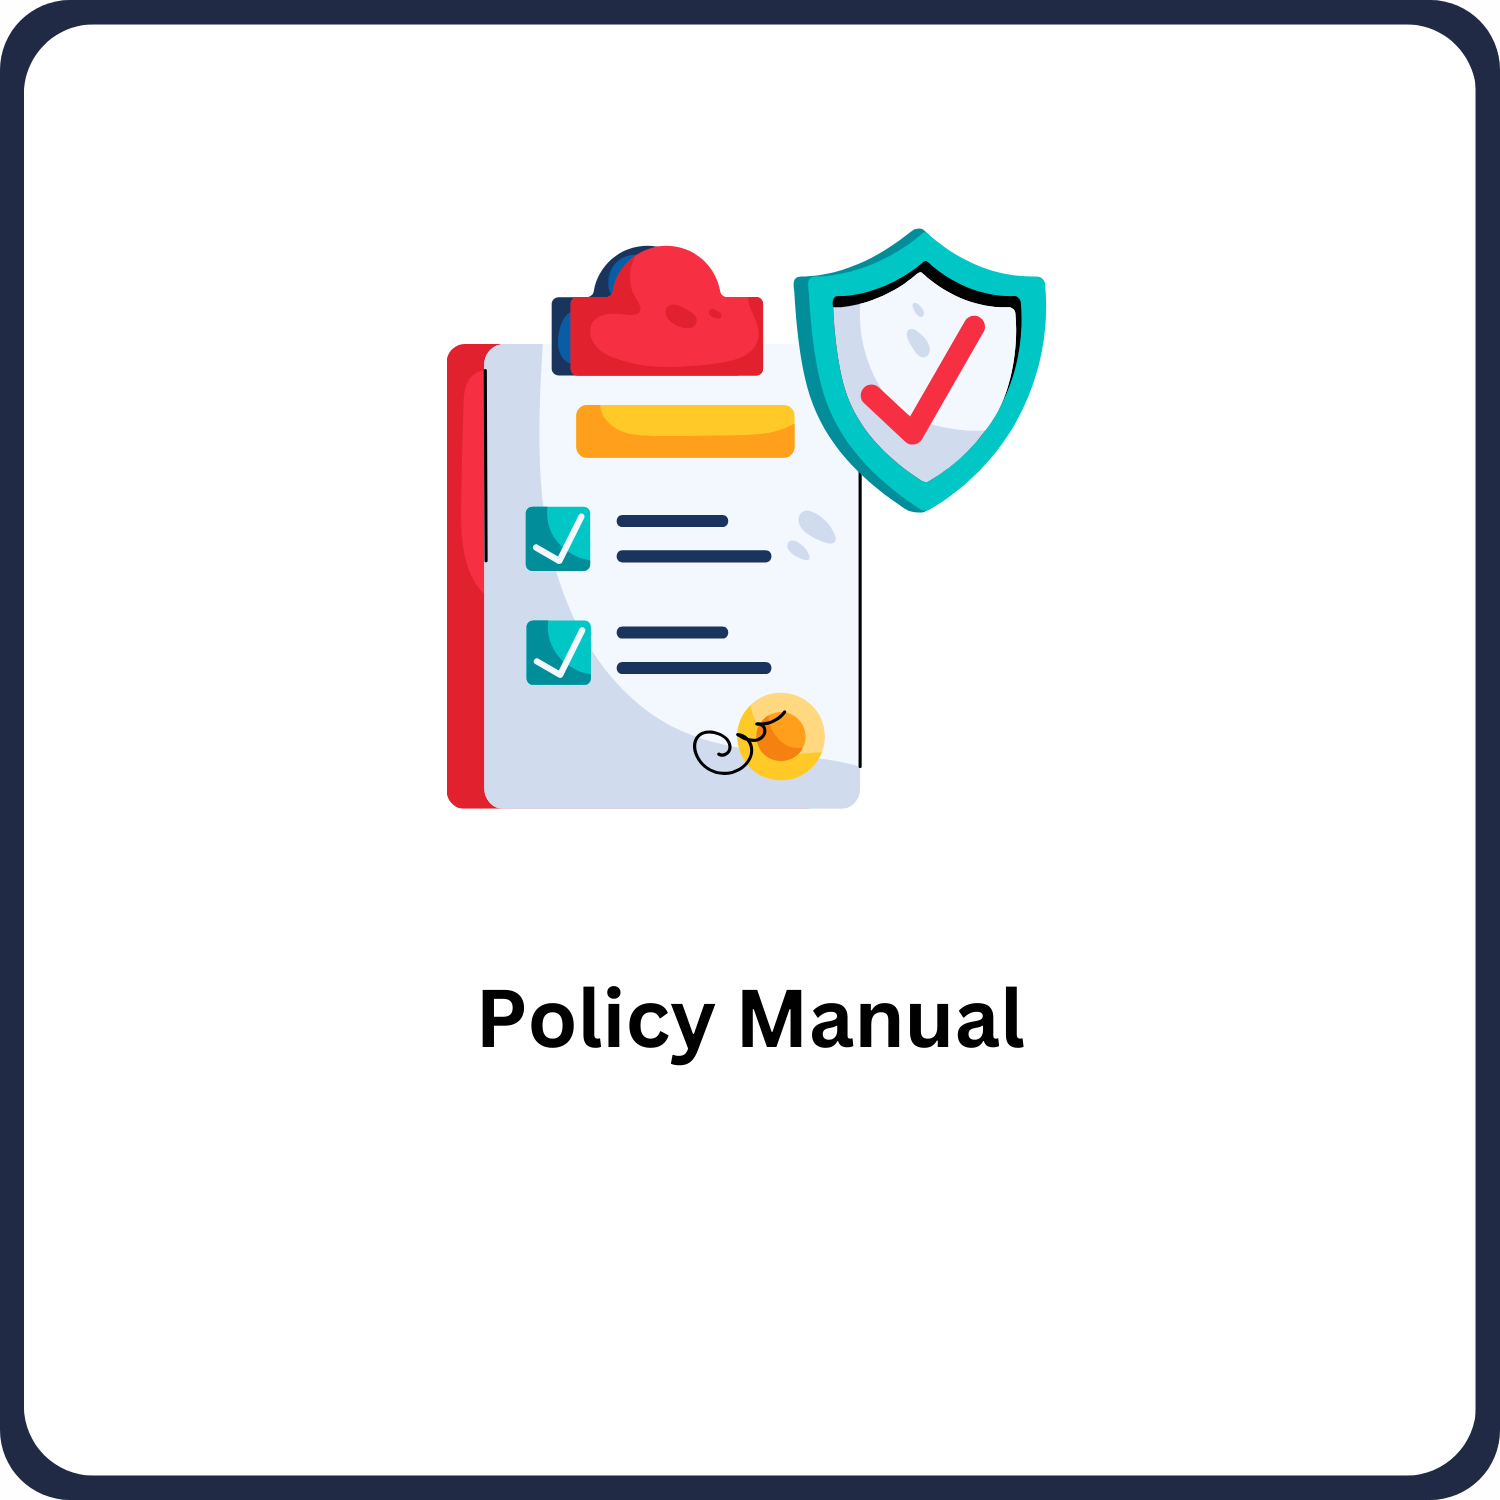 Policy Manual